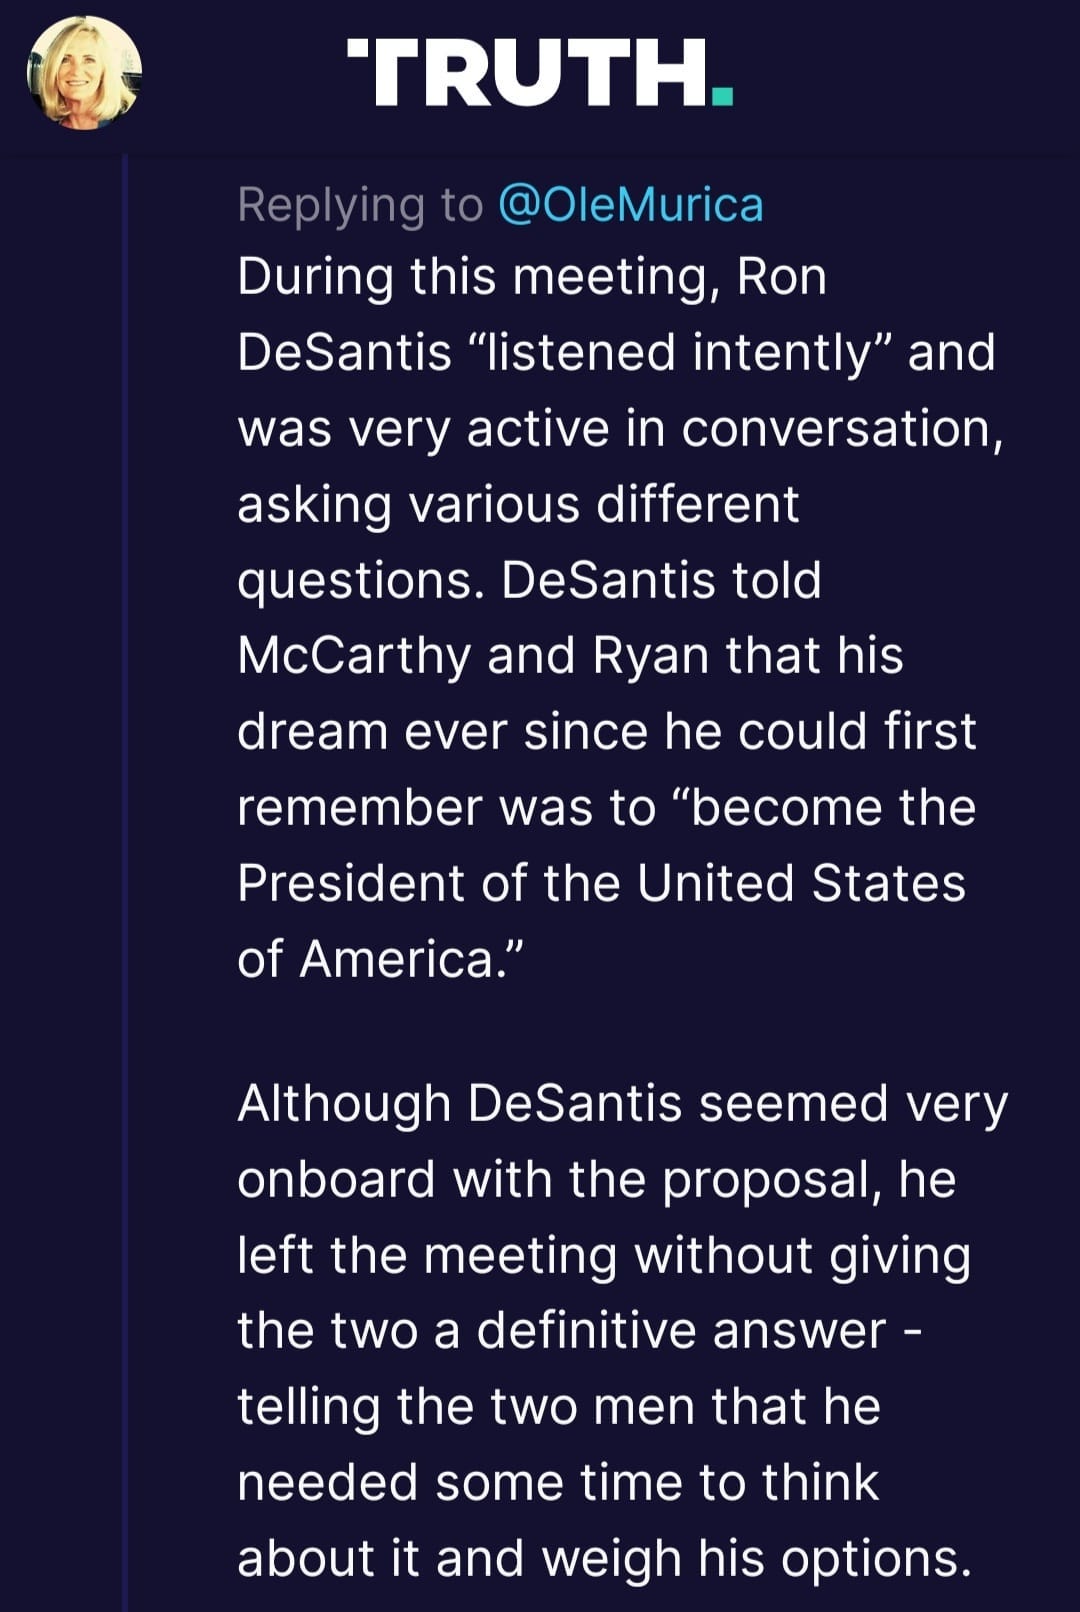 May be an image of 1 person and text that says 'TRUTH. Replying to @OleMurica During this meeting Ron DeSantis "listened intently' and was very active in conversation, asking various different questions. DeSantis told McCarthy and Ryan that his dream ever since he could first remember was to "become the President of the United States of America." Although DeSantis seemed very onboard with the proposal, he left the meeting without giving the two a definitive answer- telling the two men that he needed some time to think about it and weigh his options.'